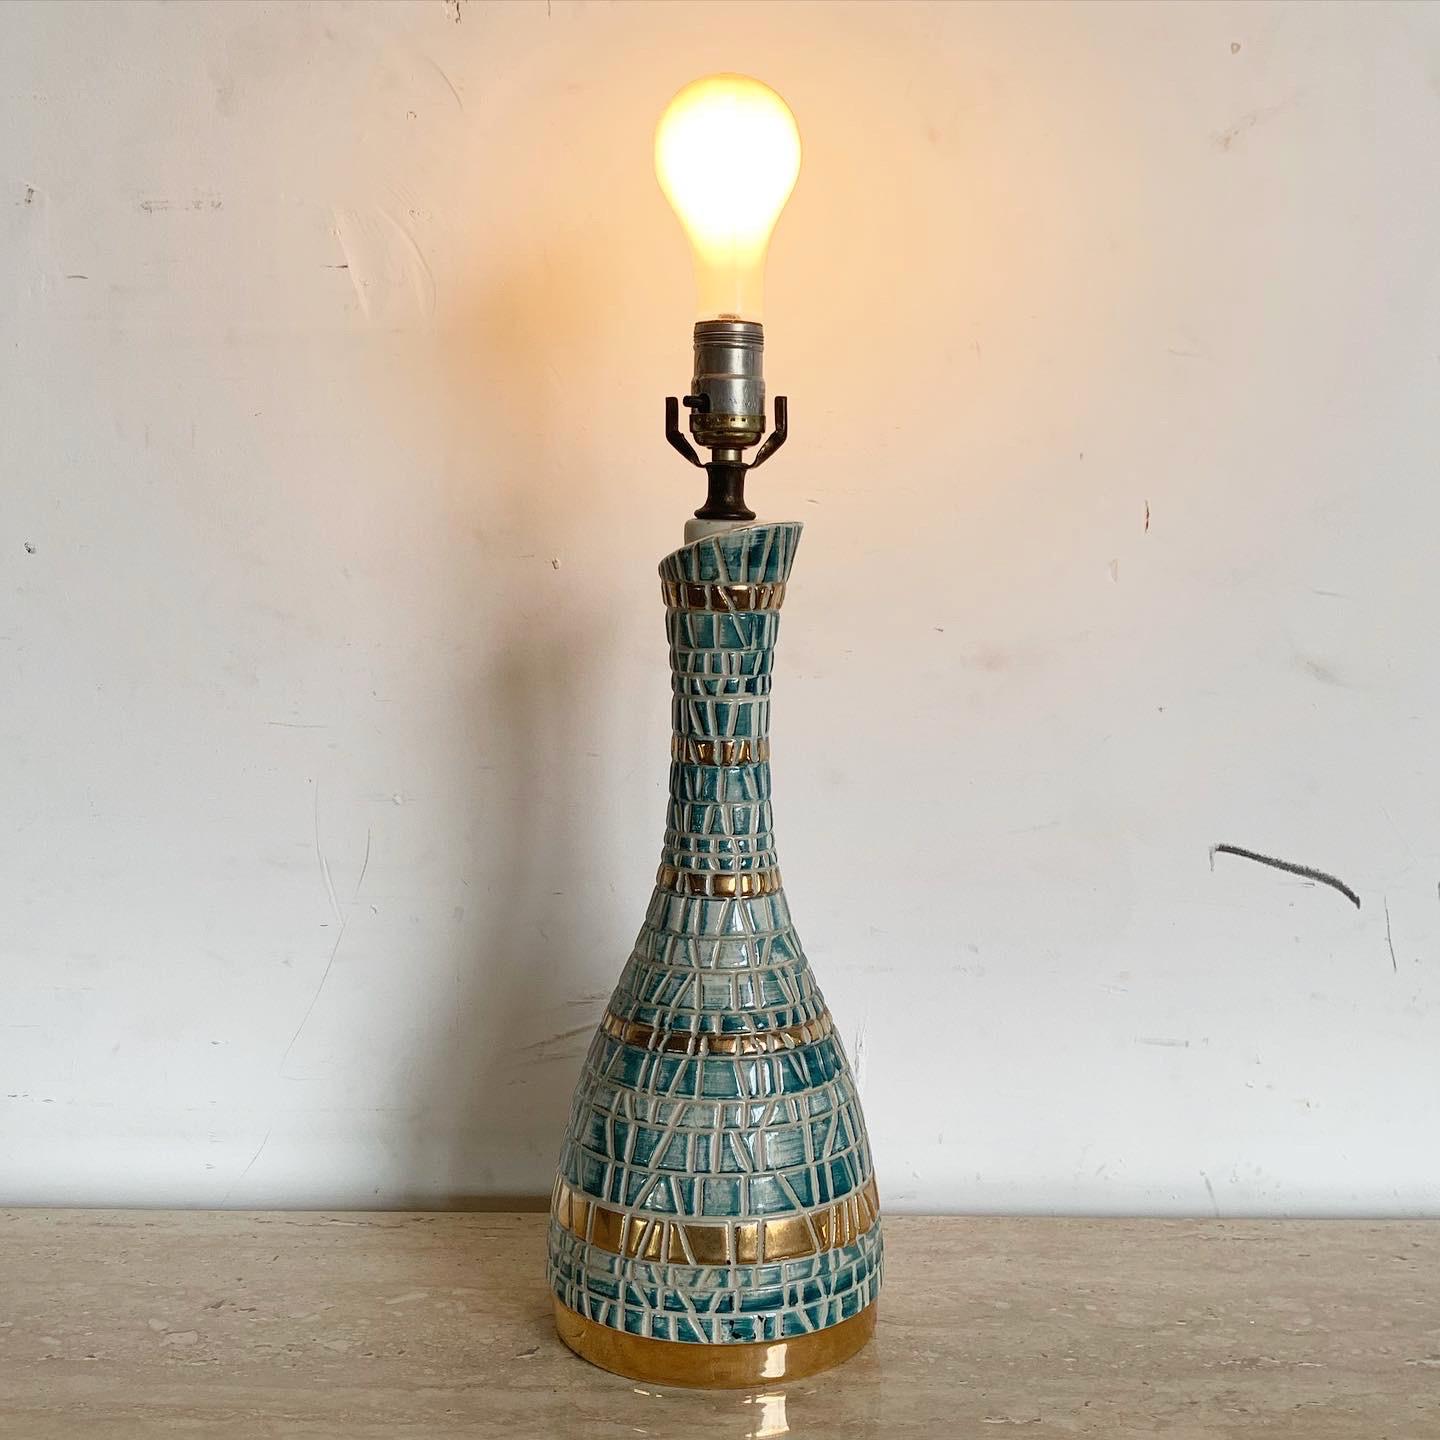 Embrace vintage flair with the Mid Century Modern Green and Gold Faux Mosaic Ceramic Table Lamp, perfect for adding charm and warmth. Embrace vintage flair with the Mid Century Modern Green and Gold Faux Mosaic Ceramic Table Lamp, perfect for adding